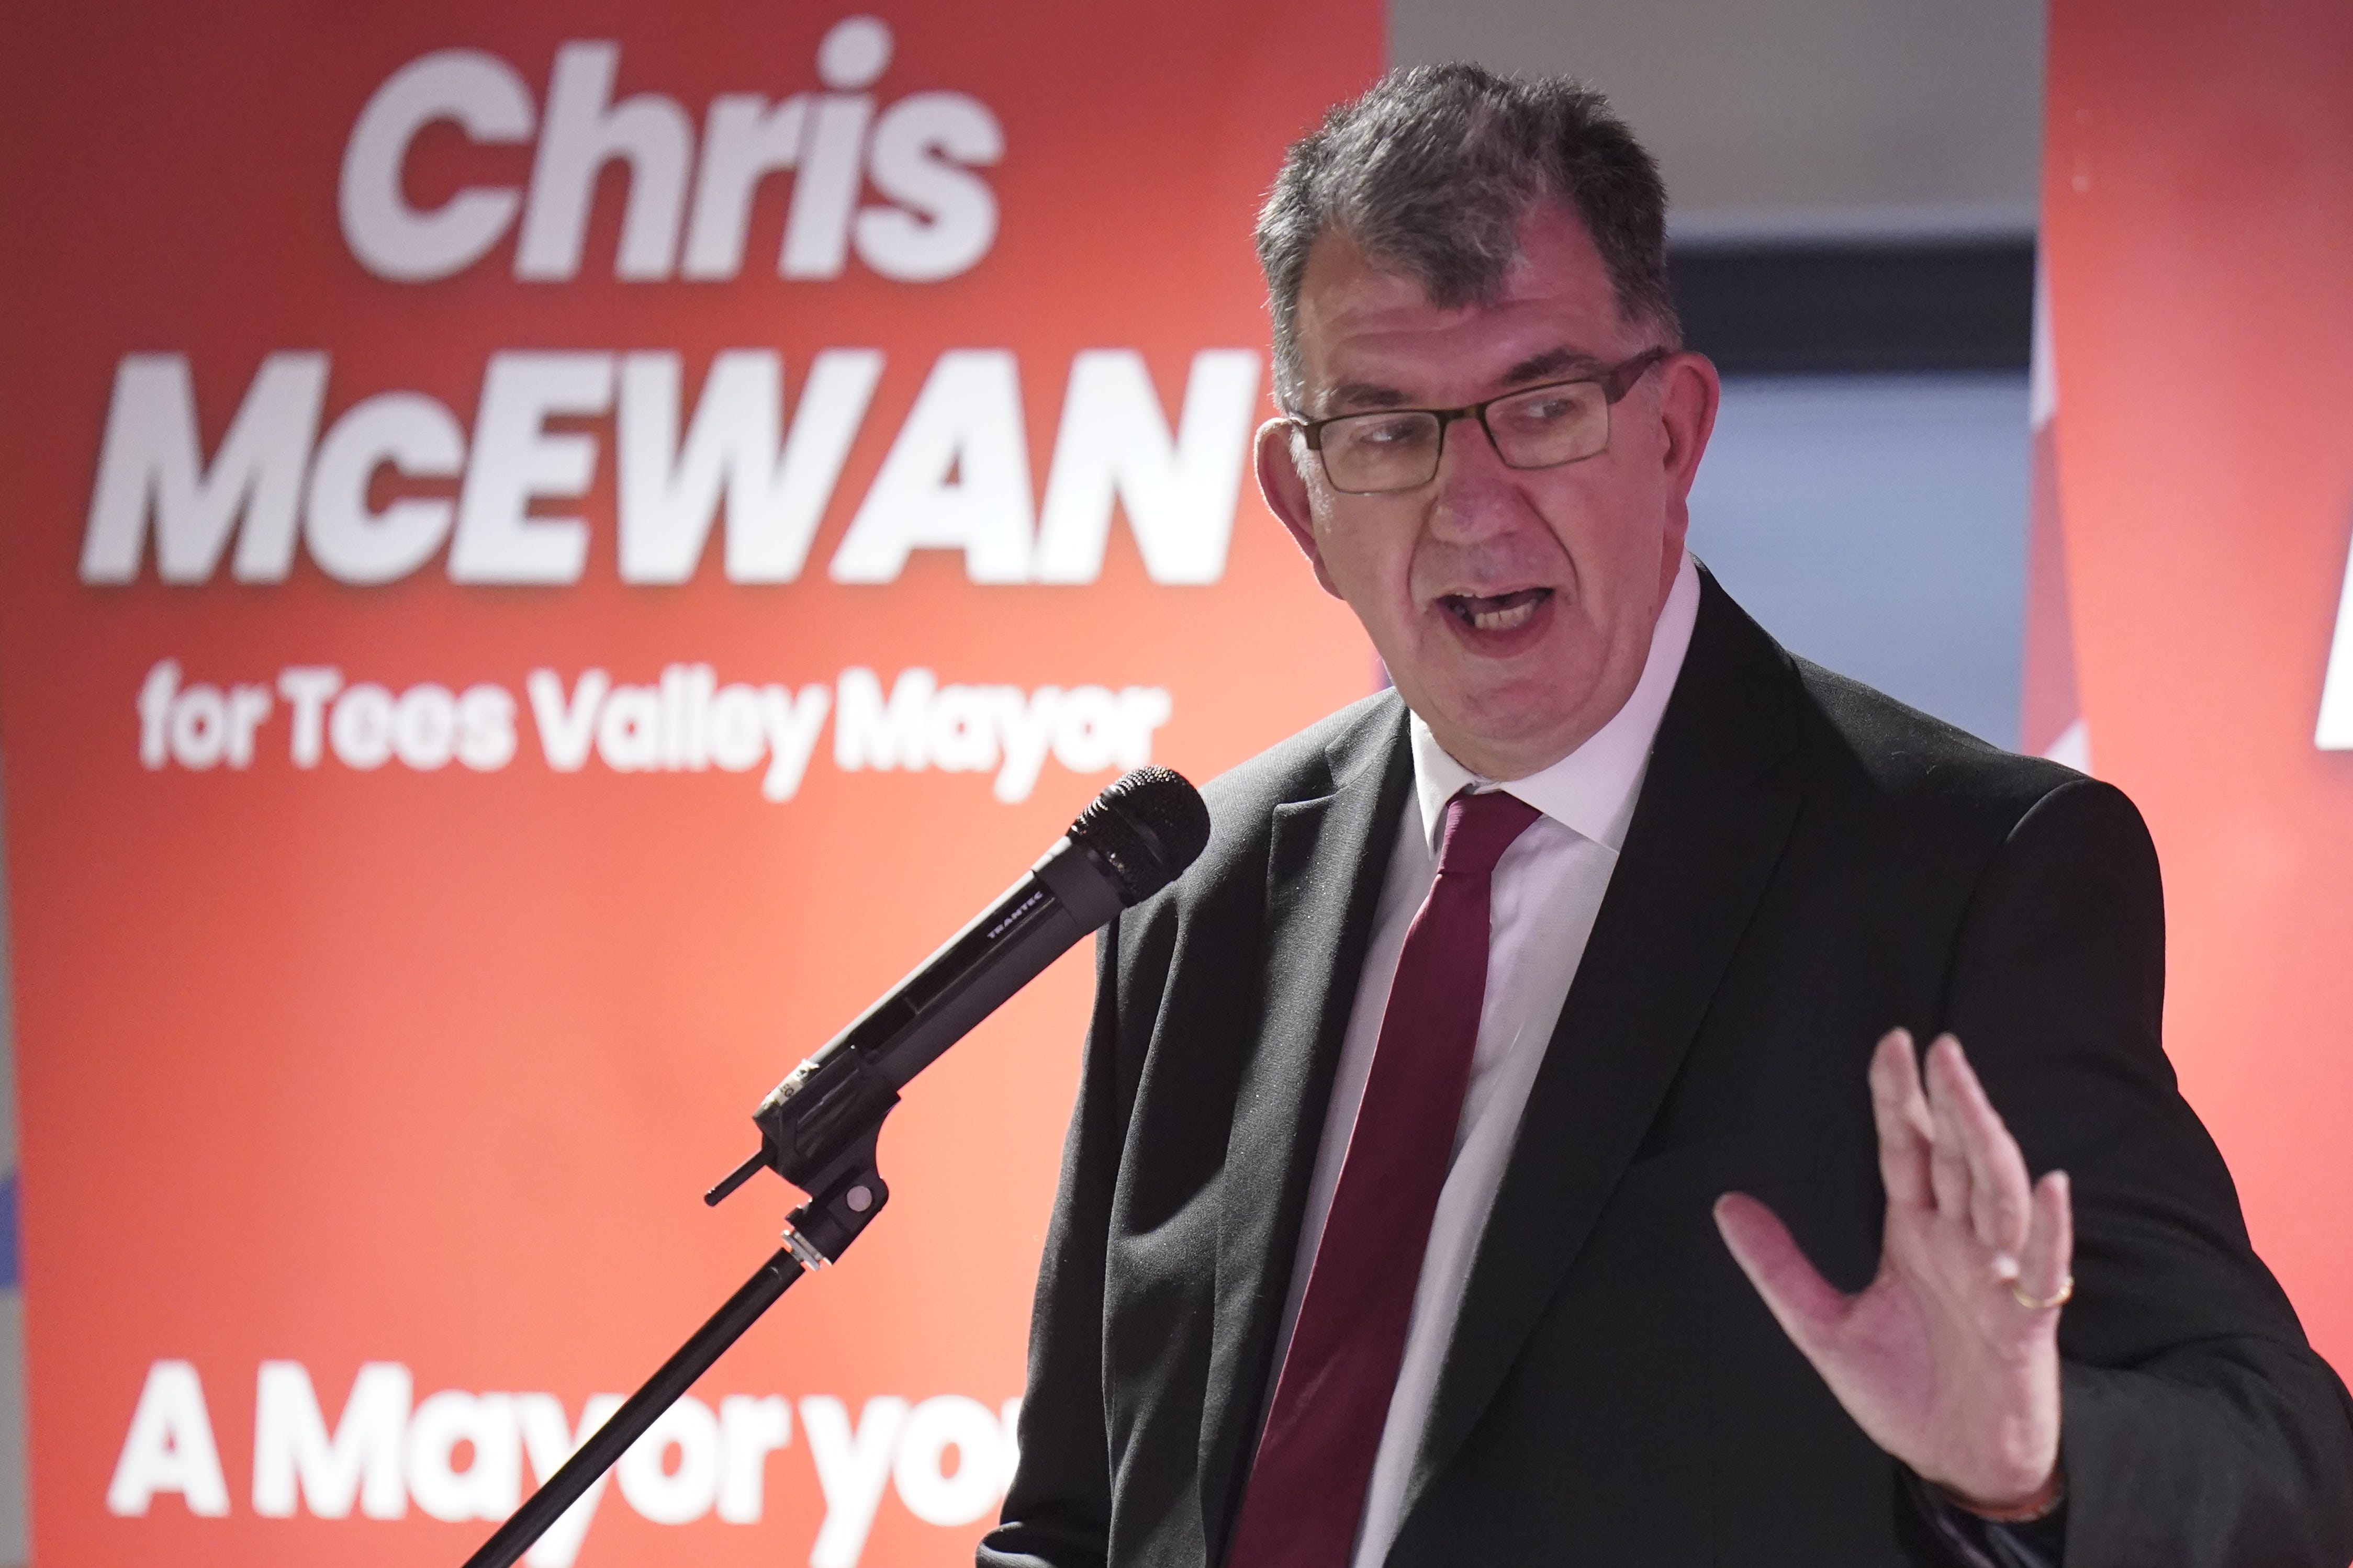 Some 45% of people in Tees Valley backed Labour’s candidate Chris McEwan